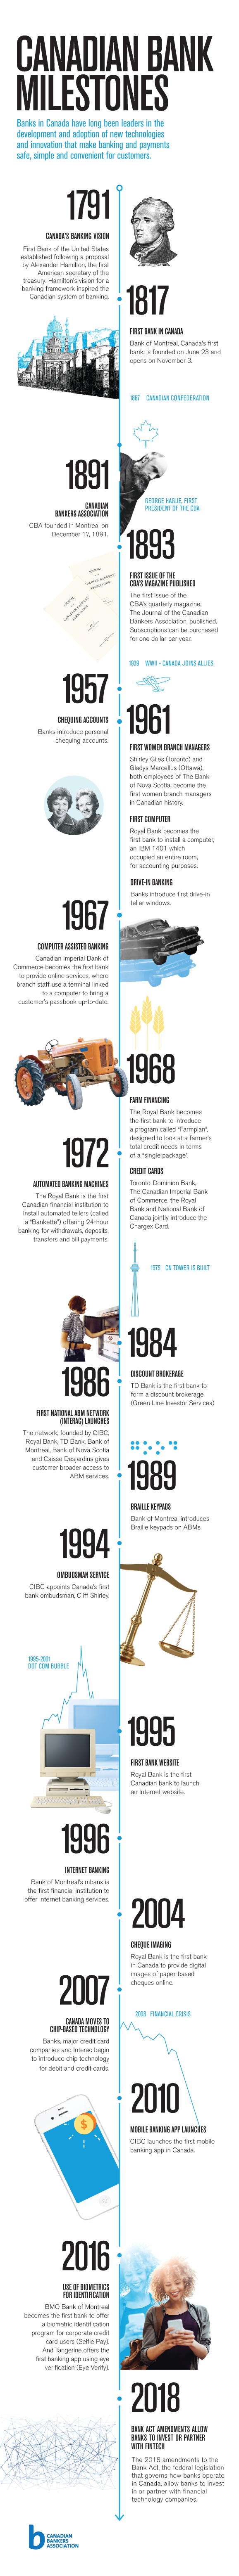 timeline depicting banking innovations in Canada from 1791 to 2018